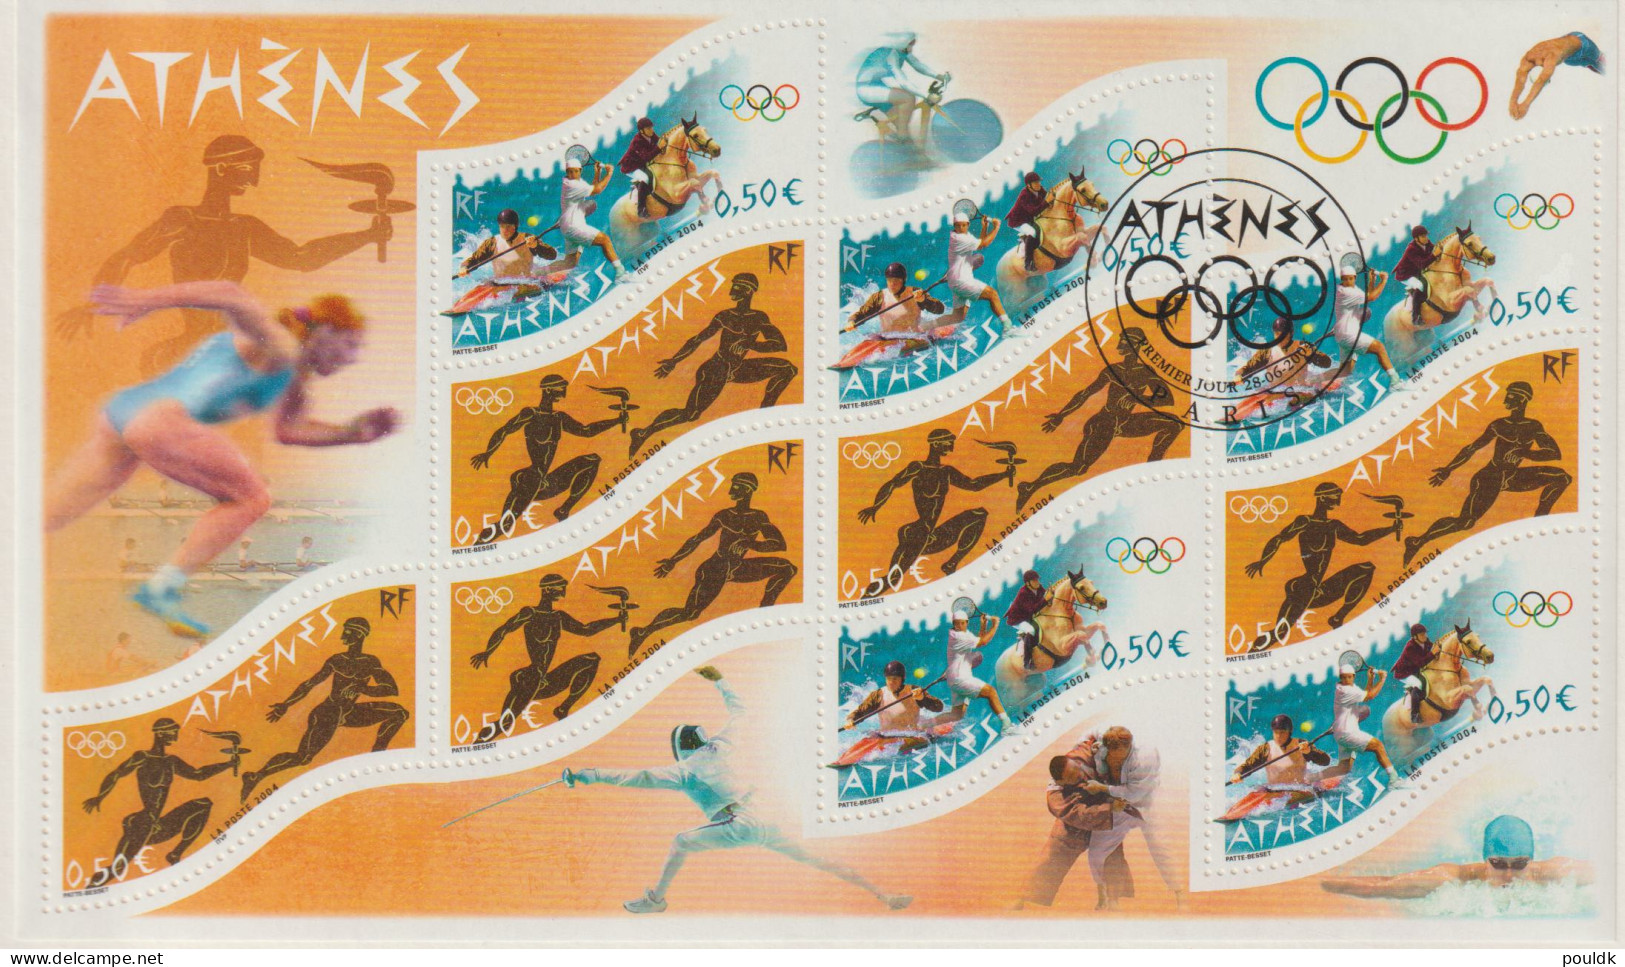 France 2004 Olympic Games Athens Souvenir Sheet Used On French Postal Folder. Postal Weight Approx 99 Gramms - Sommer 2004: Athen